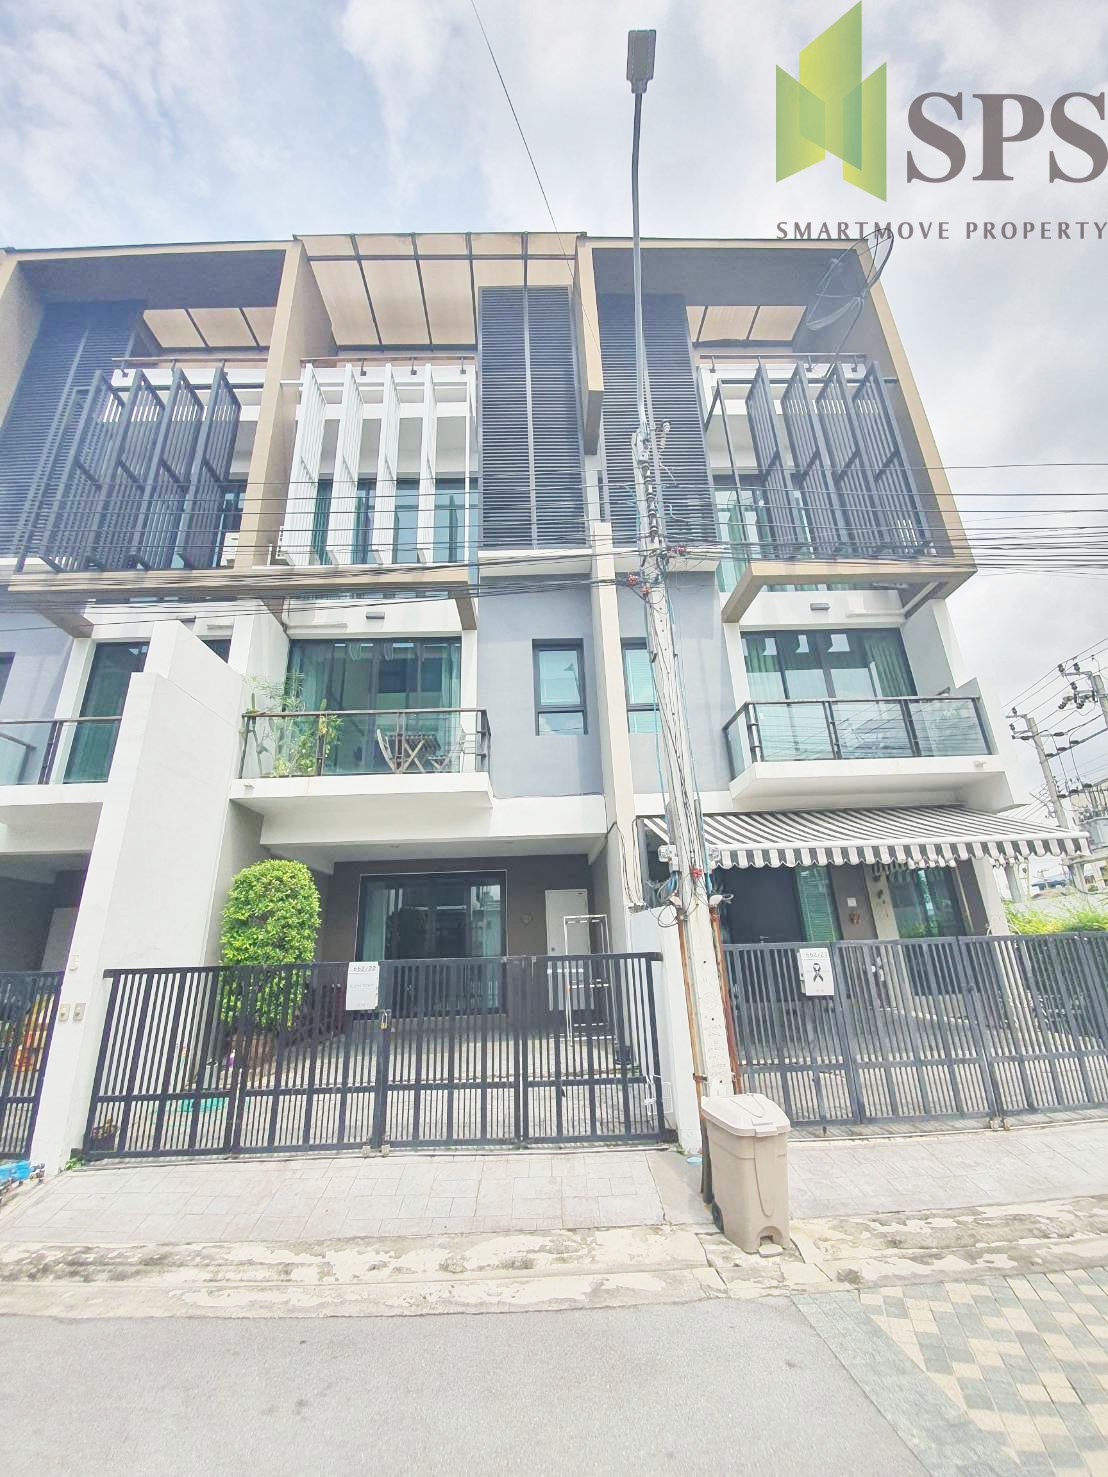 Townhome for RENT in Bless Town Sukhumvit 50 (SPSP376)